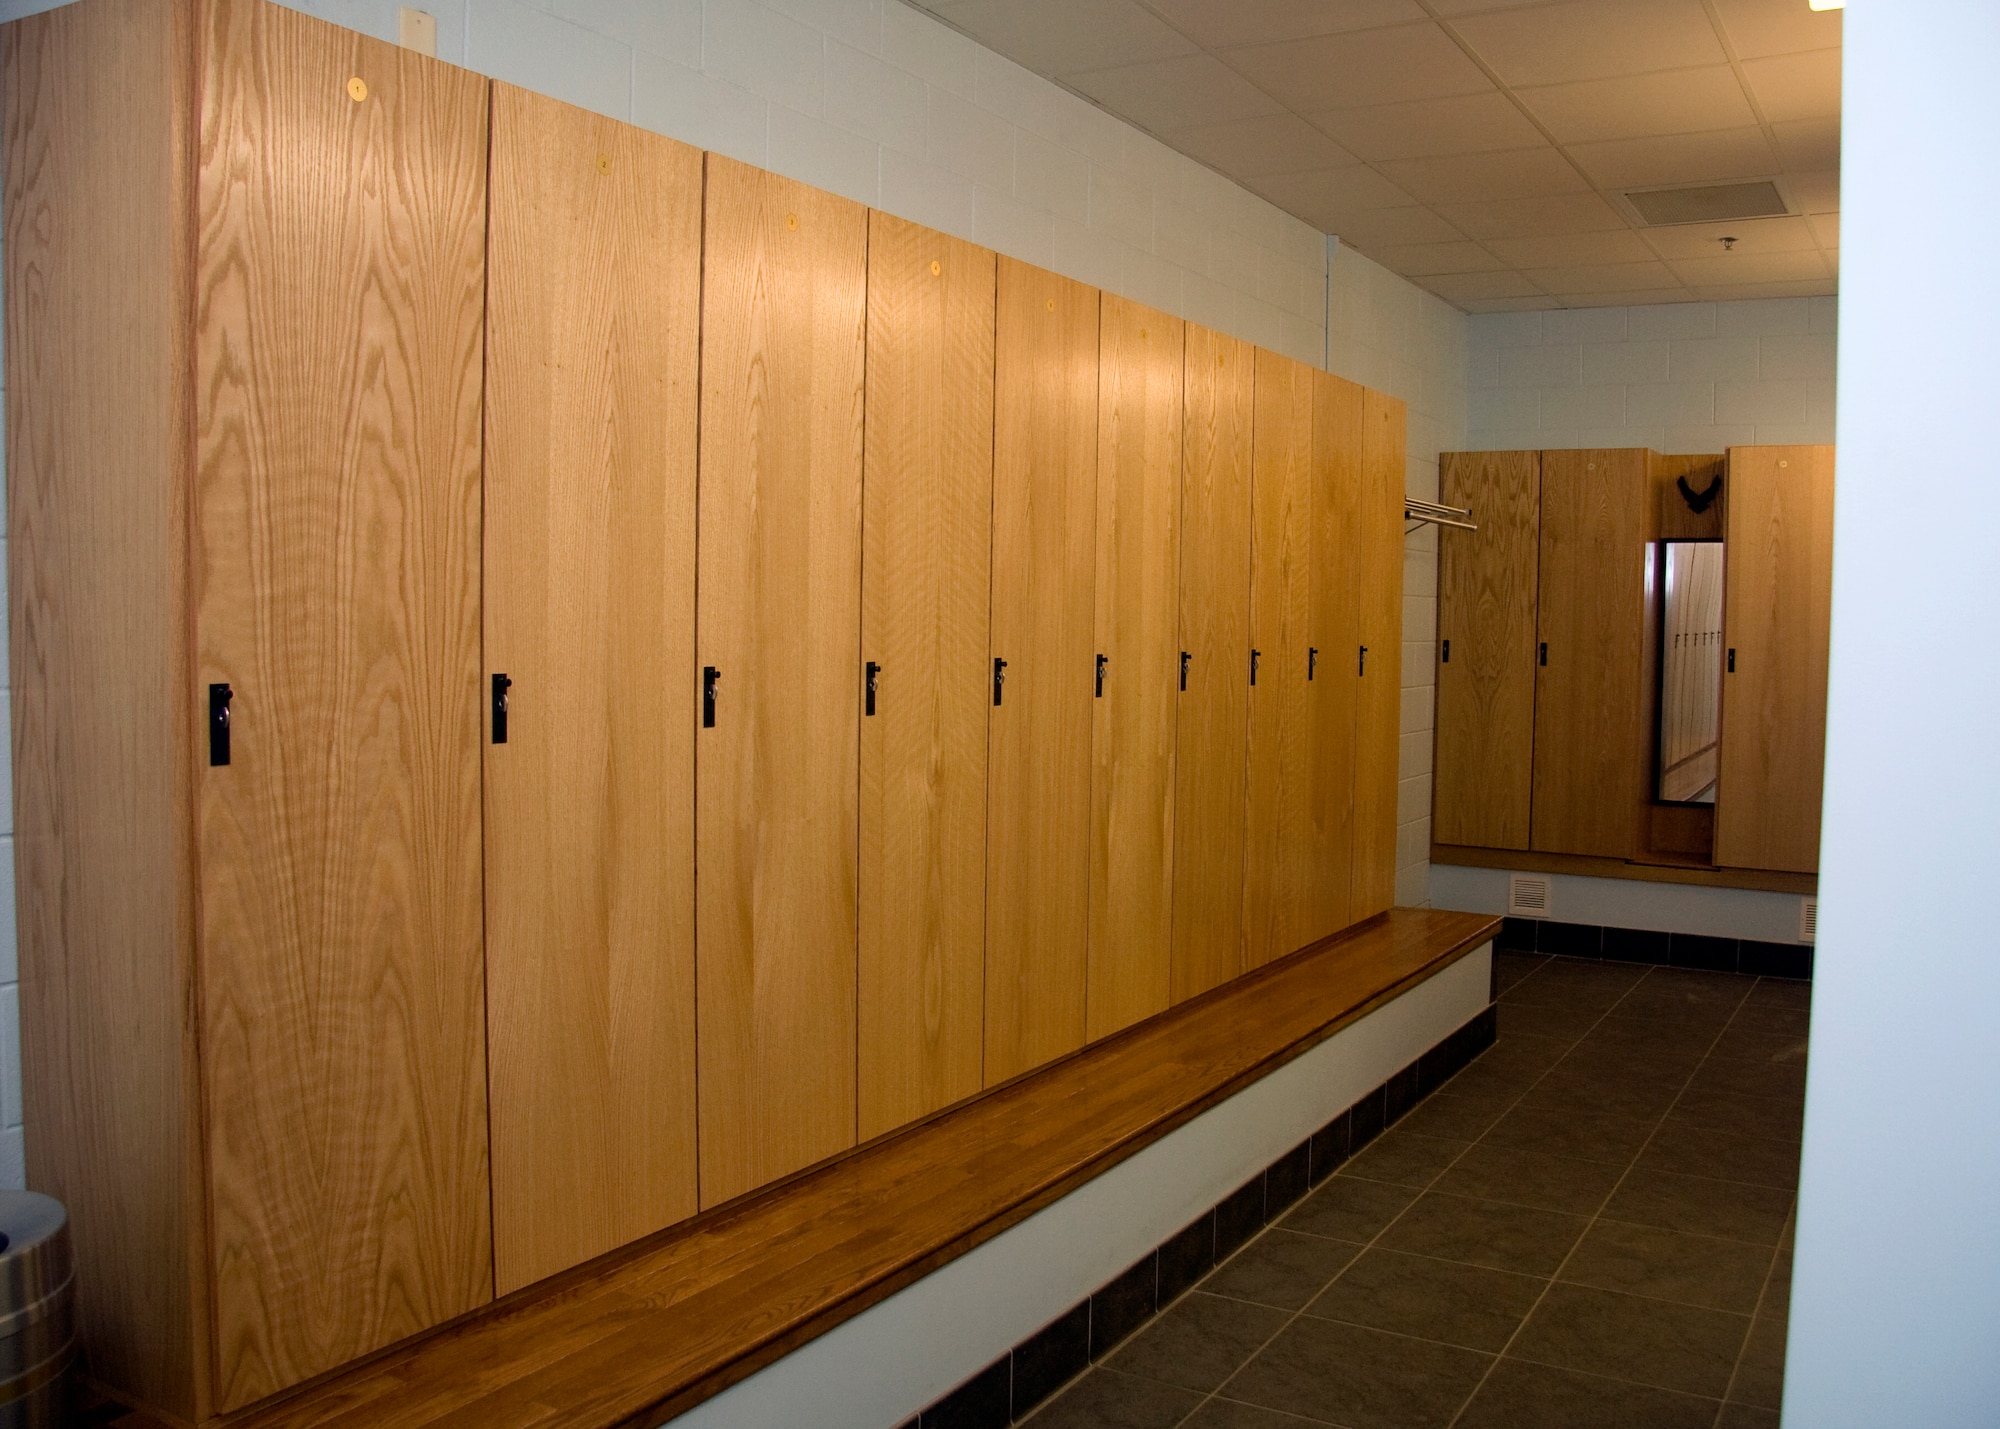 GRISSOM AIR RESERVE BASE, Ind. -- New wooden lockers were recently installed in the female locker room at the base fitness center. The new lockers, which were also installed in the male locker room, provide double the storage space to the user and replaced aging metal lockers that were originally installed when the facility was a child development center. (U.S. Air Force photo/Tech. Sgt. Mark R. W. Orders-Woempner) 
